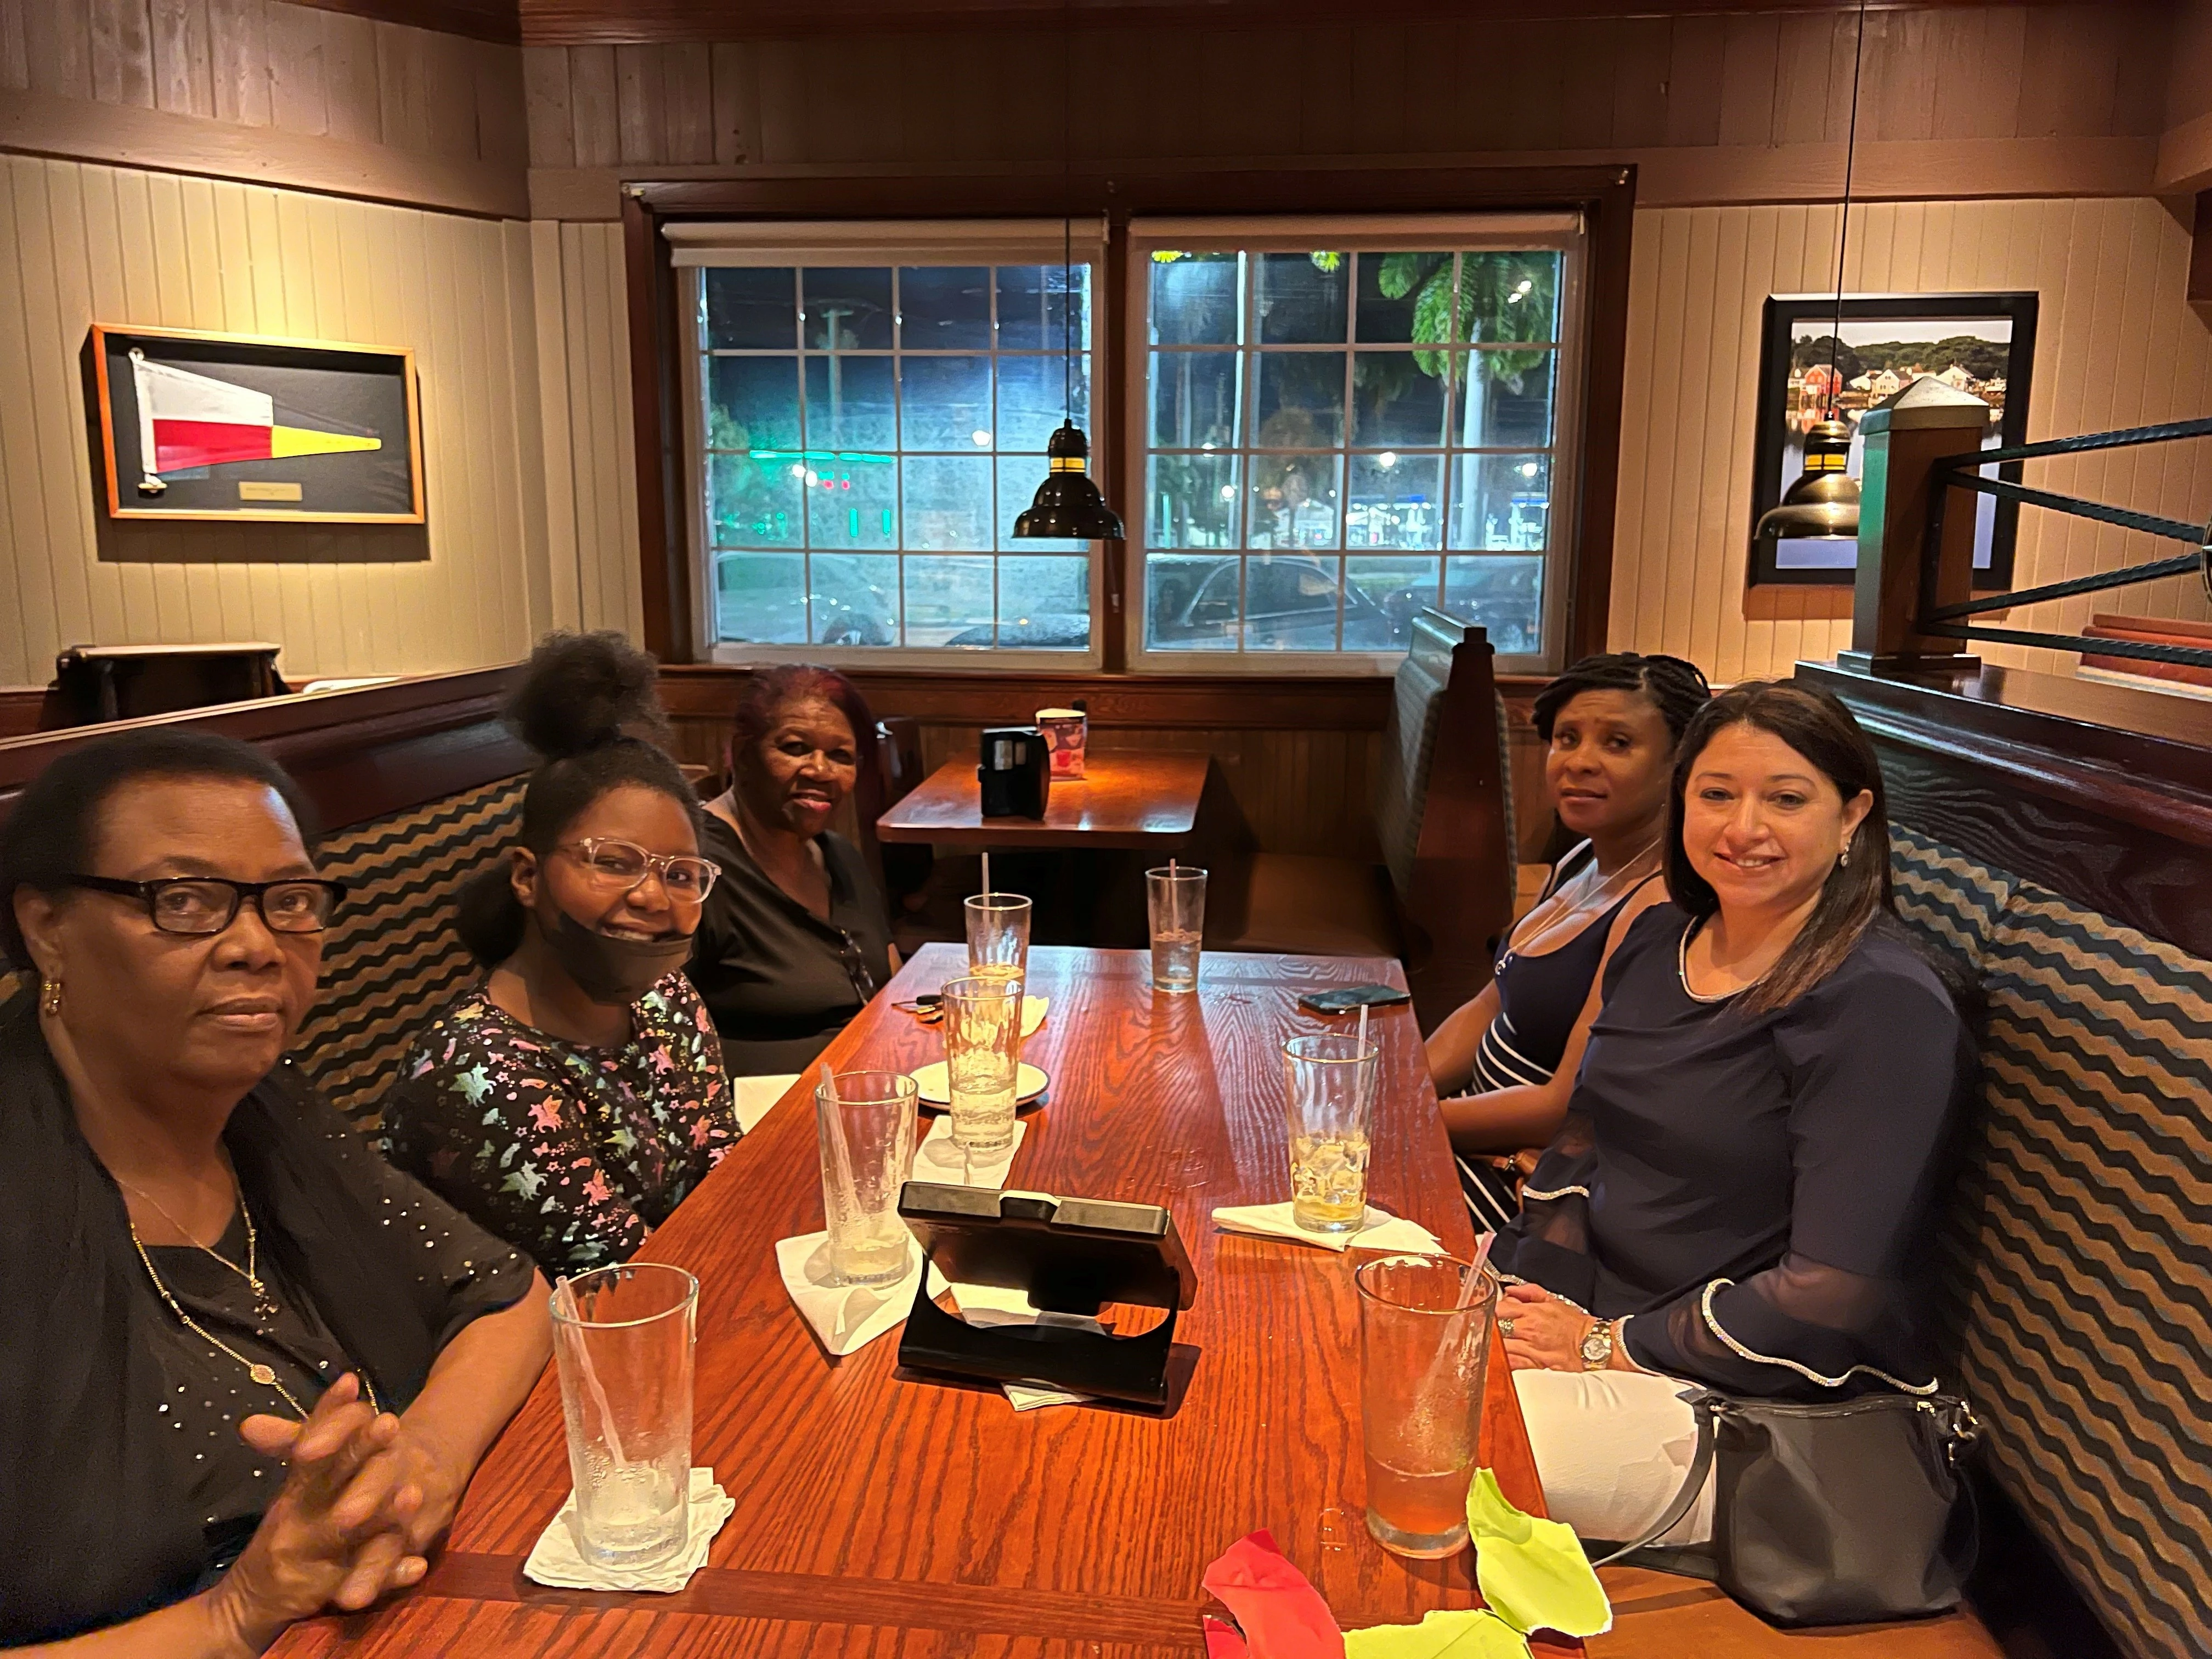 Dinner with Caregivers. Enjoying time together! Thank you for all you do!!!